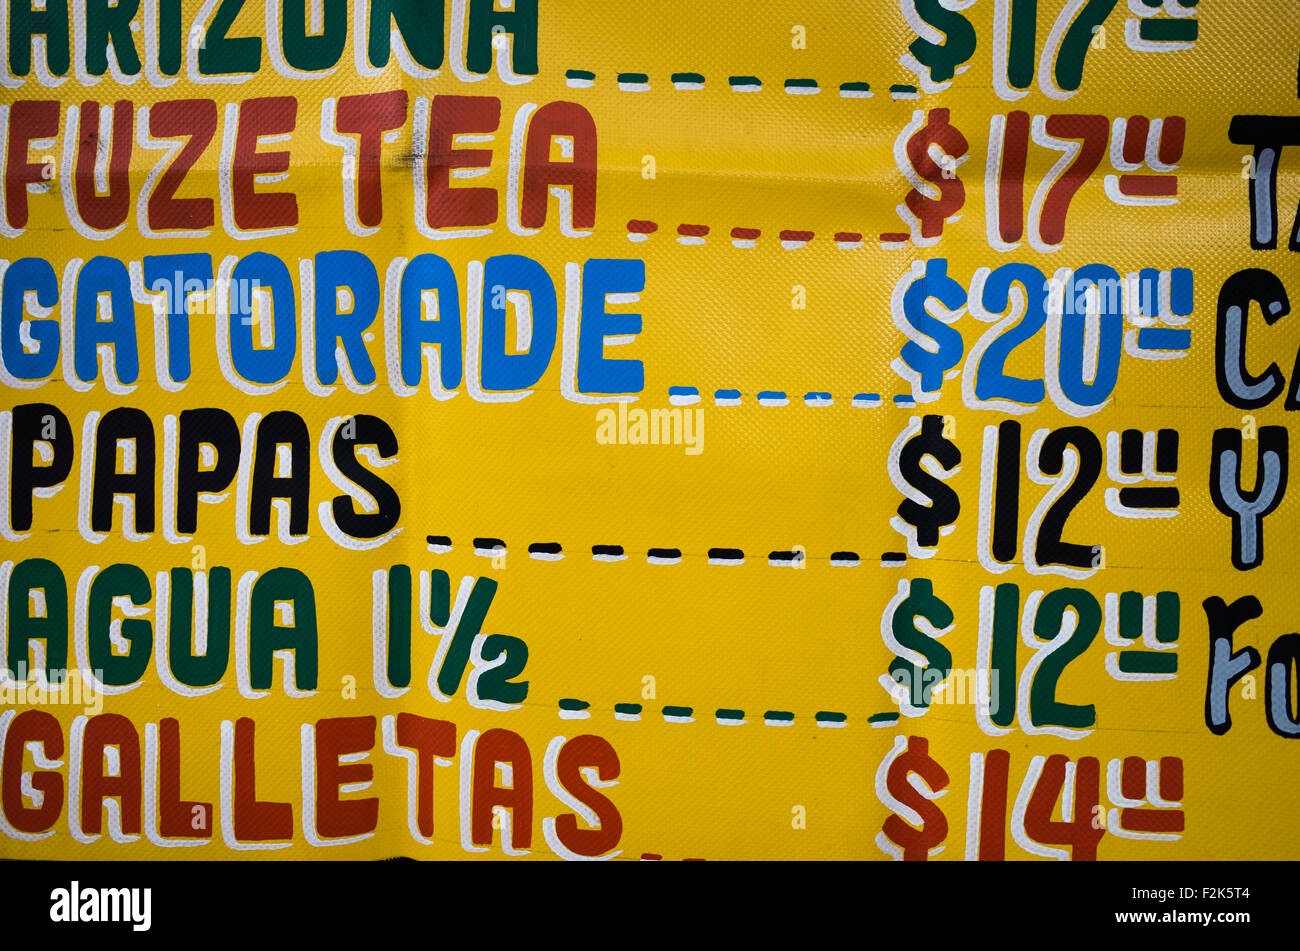 The drinks price list of a street vendor in Mexico City. Stock Photo